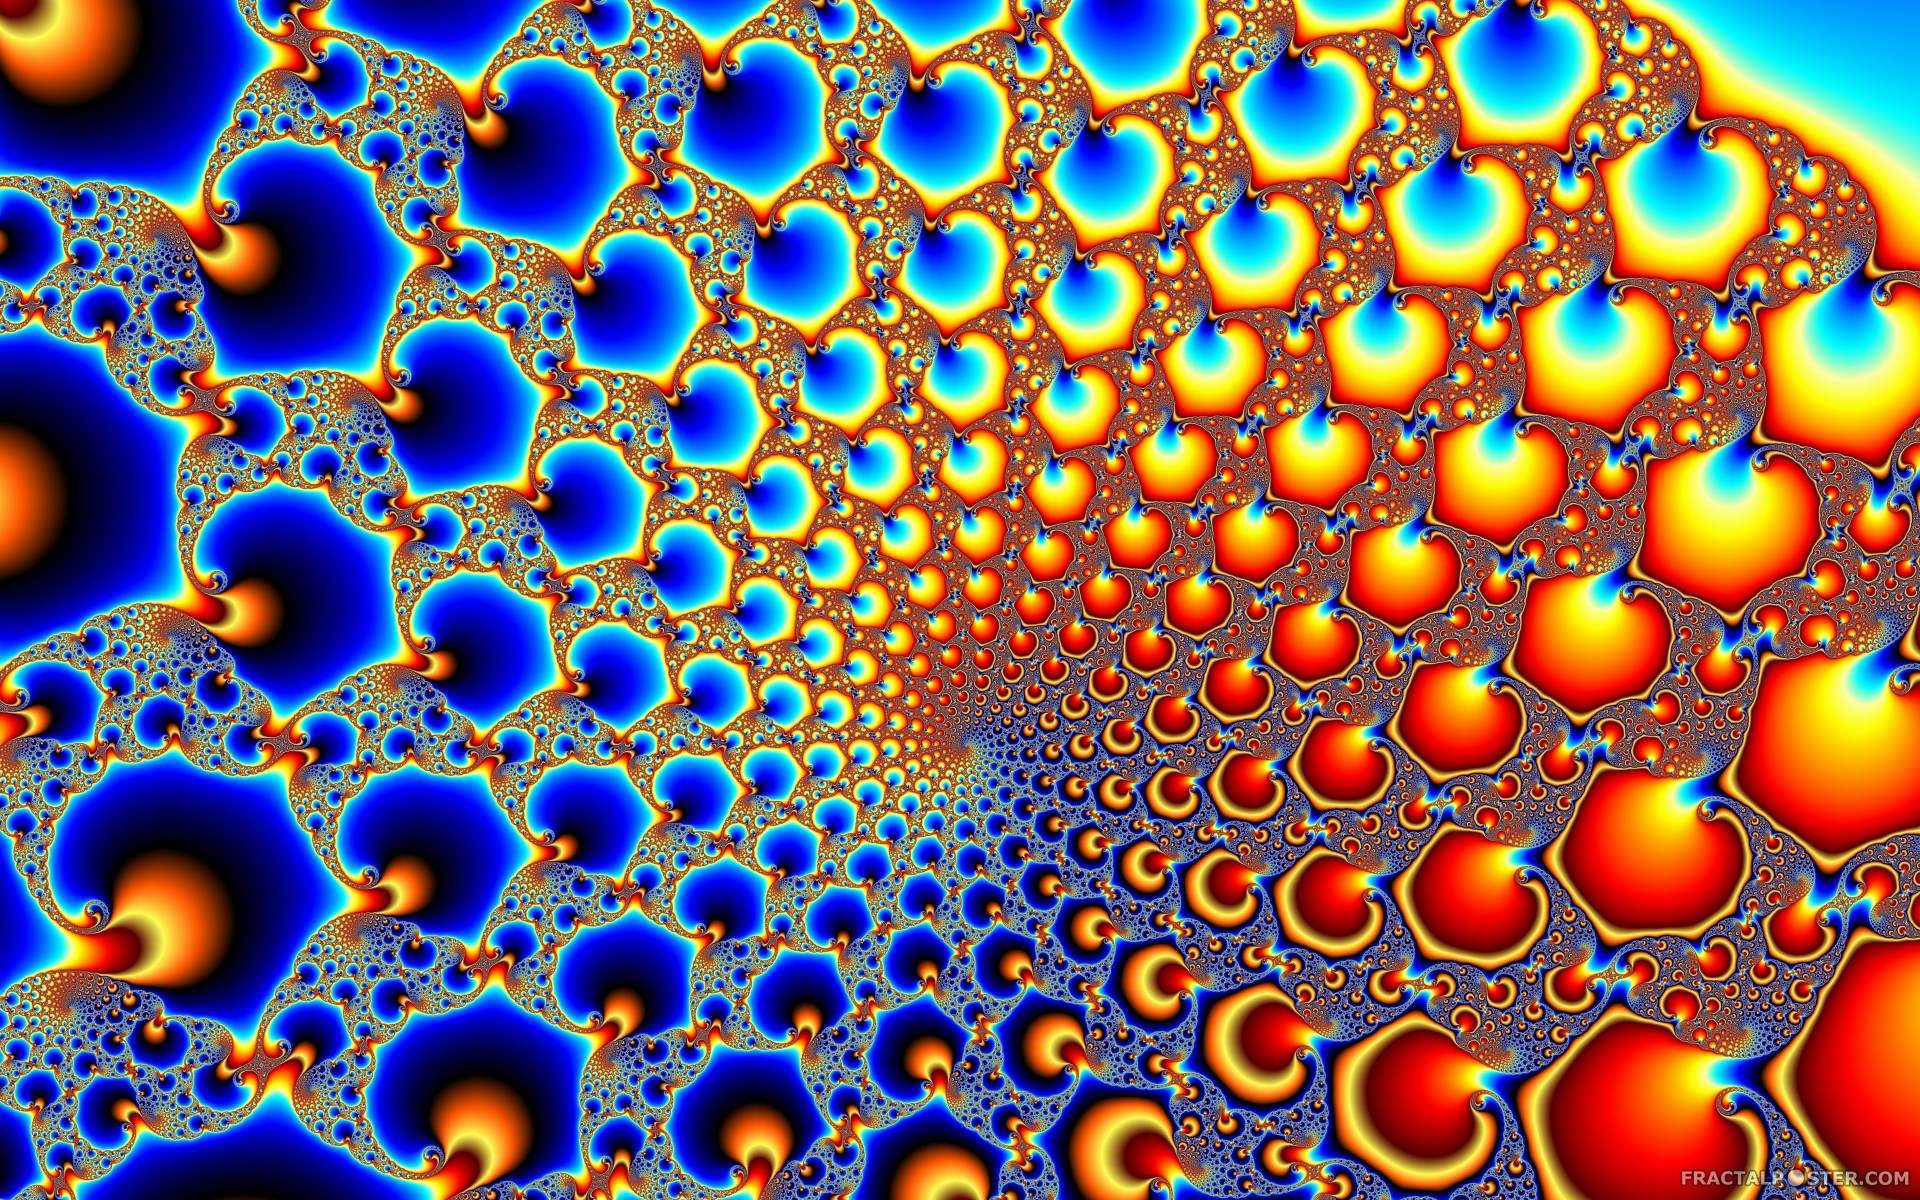 hipnotic posters | hypnotic portal" fractal image by pat197. HD Wallpapers,  posters .